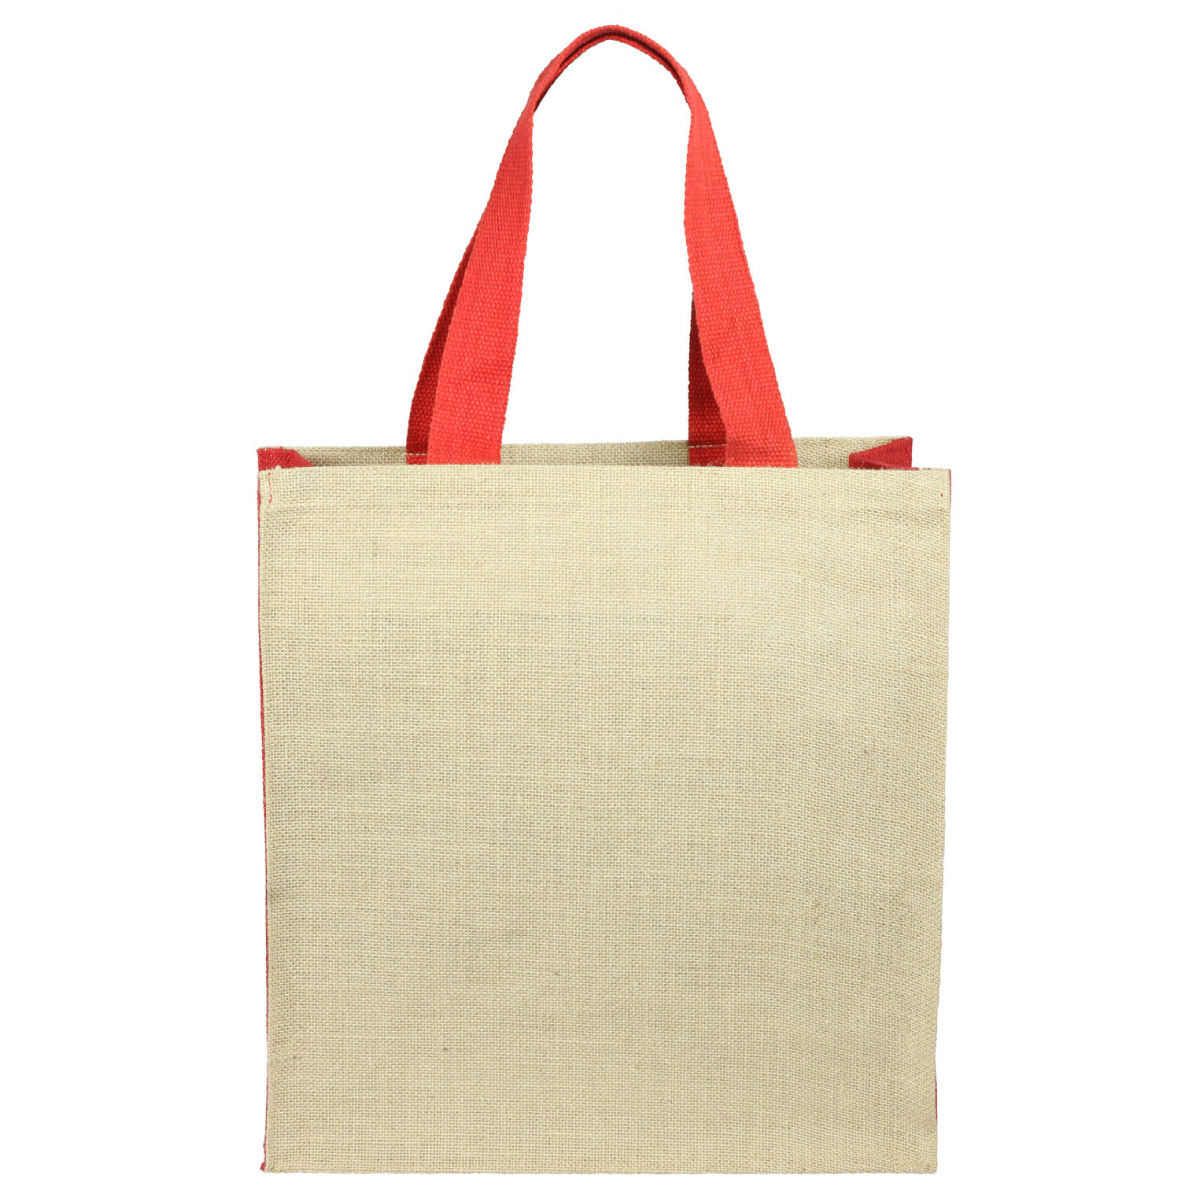 Promotional Panelled Jute Bags | Promotion Products